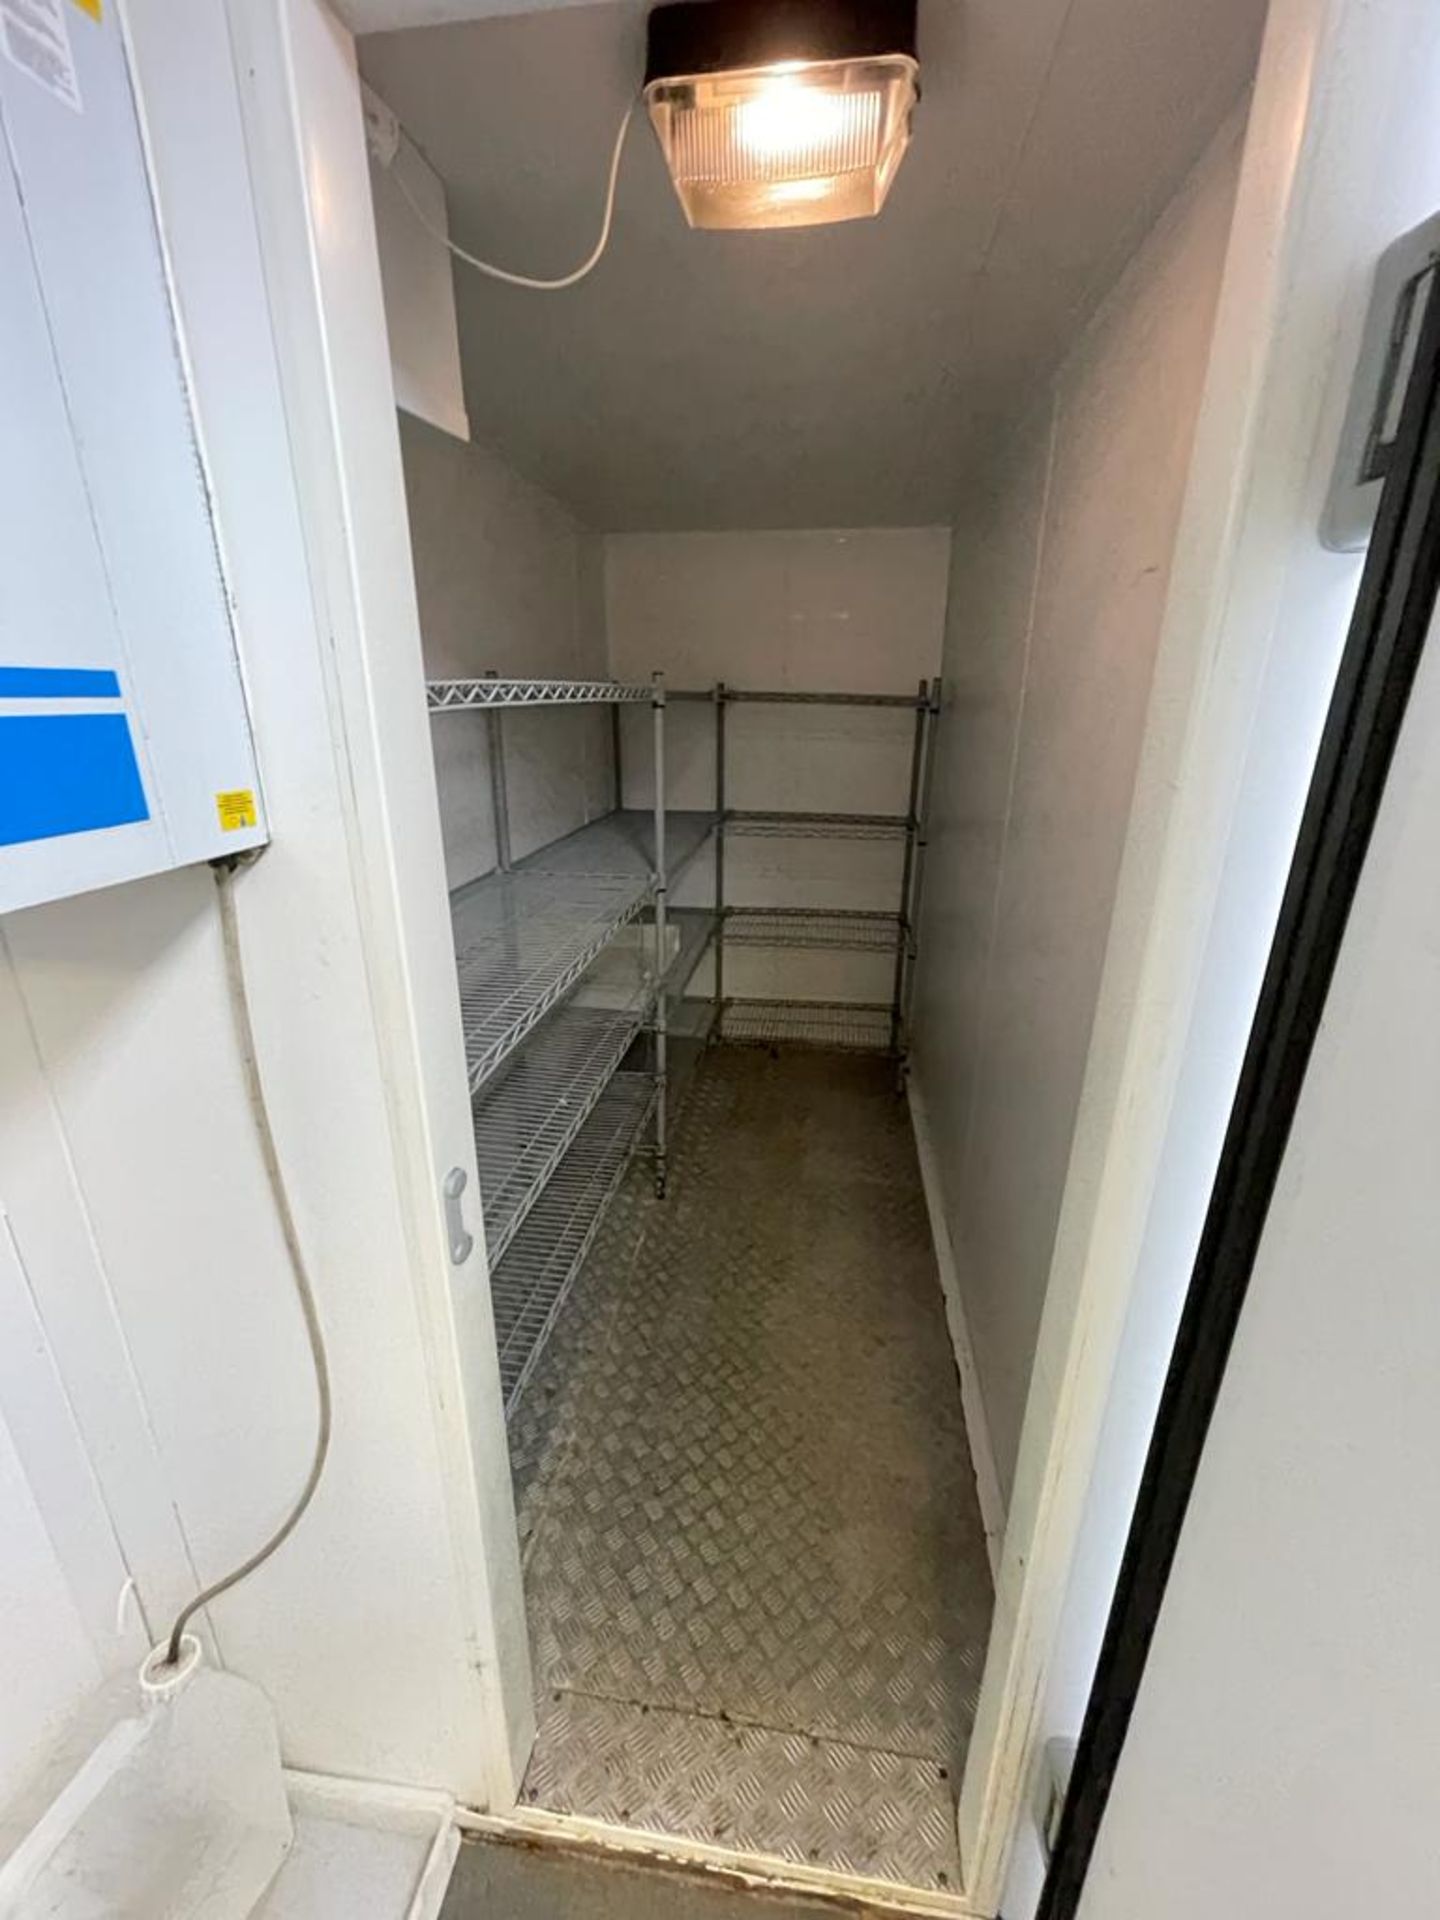 1 x Walk In Refrigerated Cold and Freezer With Zanotti Control Units - Ref: BK249 - CL686 - - Image 18 of 24